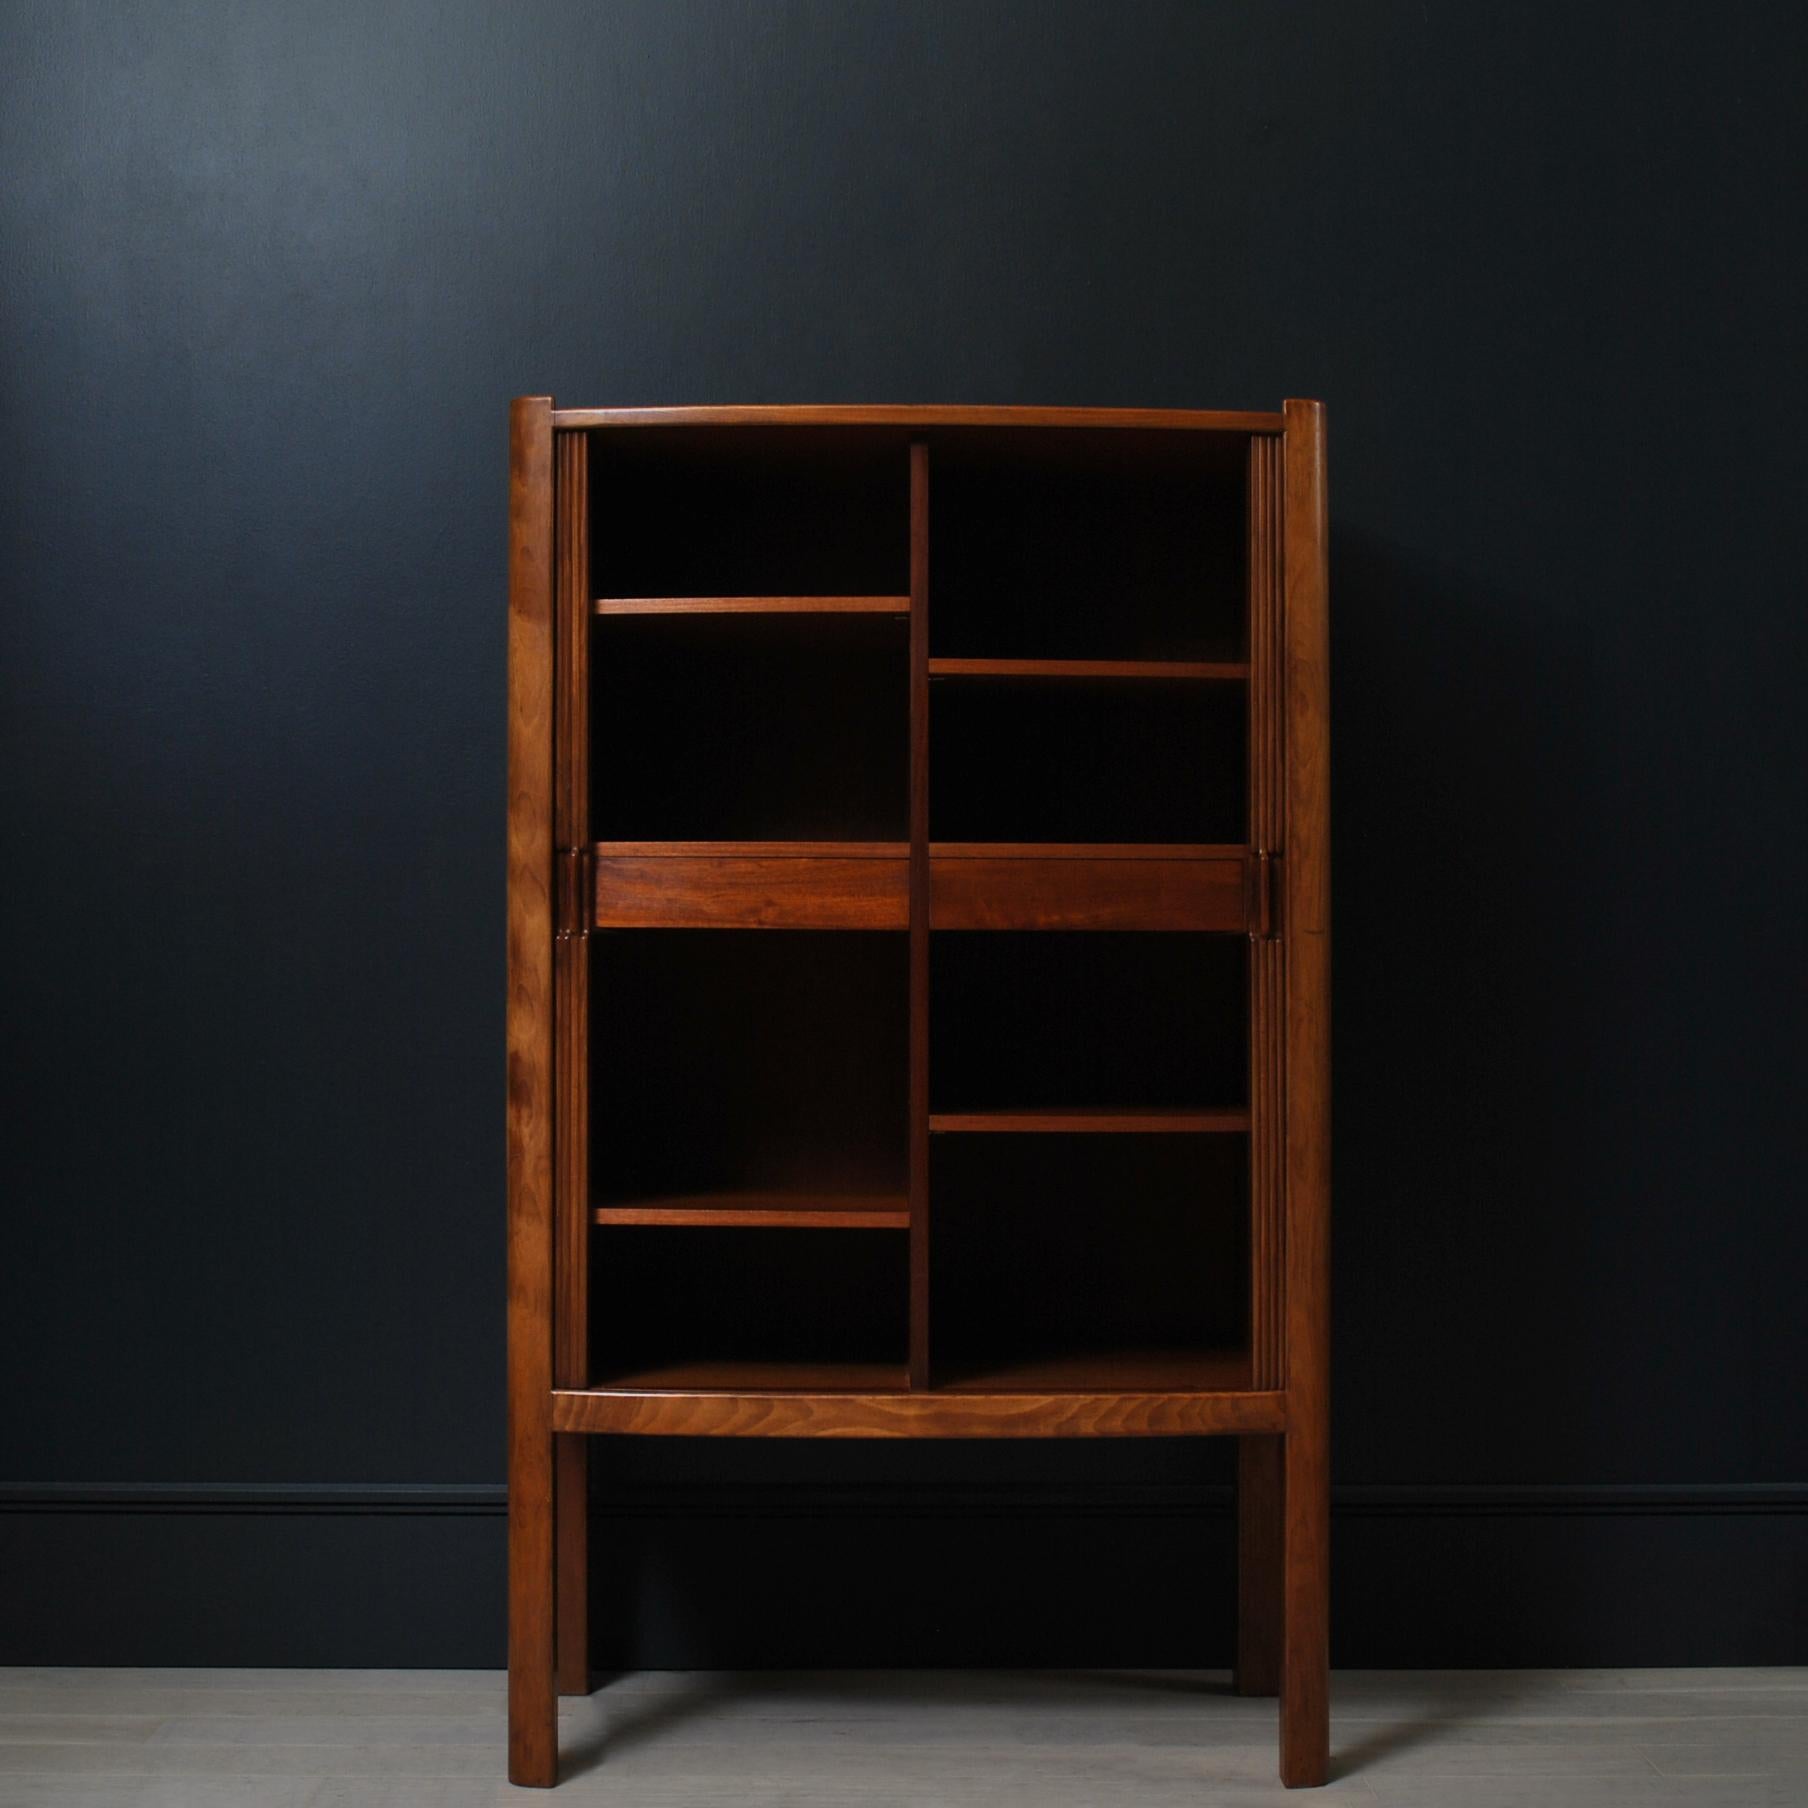 An outstanding large and tall tambour cupboard/cabinet in Cuban Mahogany with interior of teak. This piece of fine furniture is of significant design heritage and importance - coming from a design and maker pairing in the early careers of Kristian